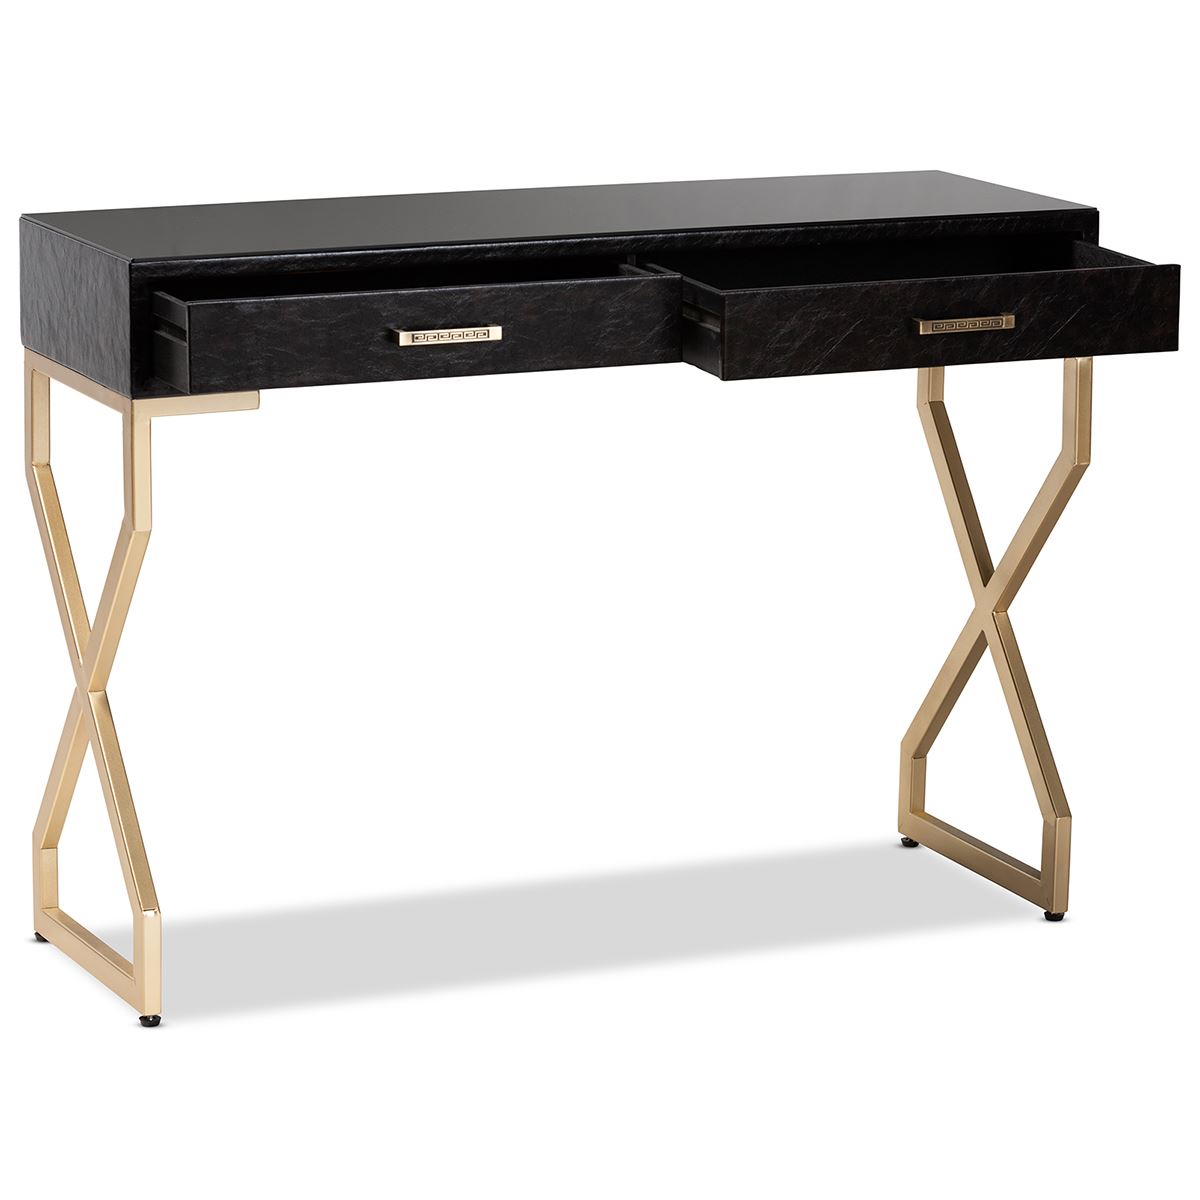 Baxton Studio Carville 2 Drawer Console Table